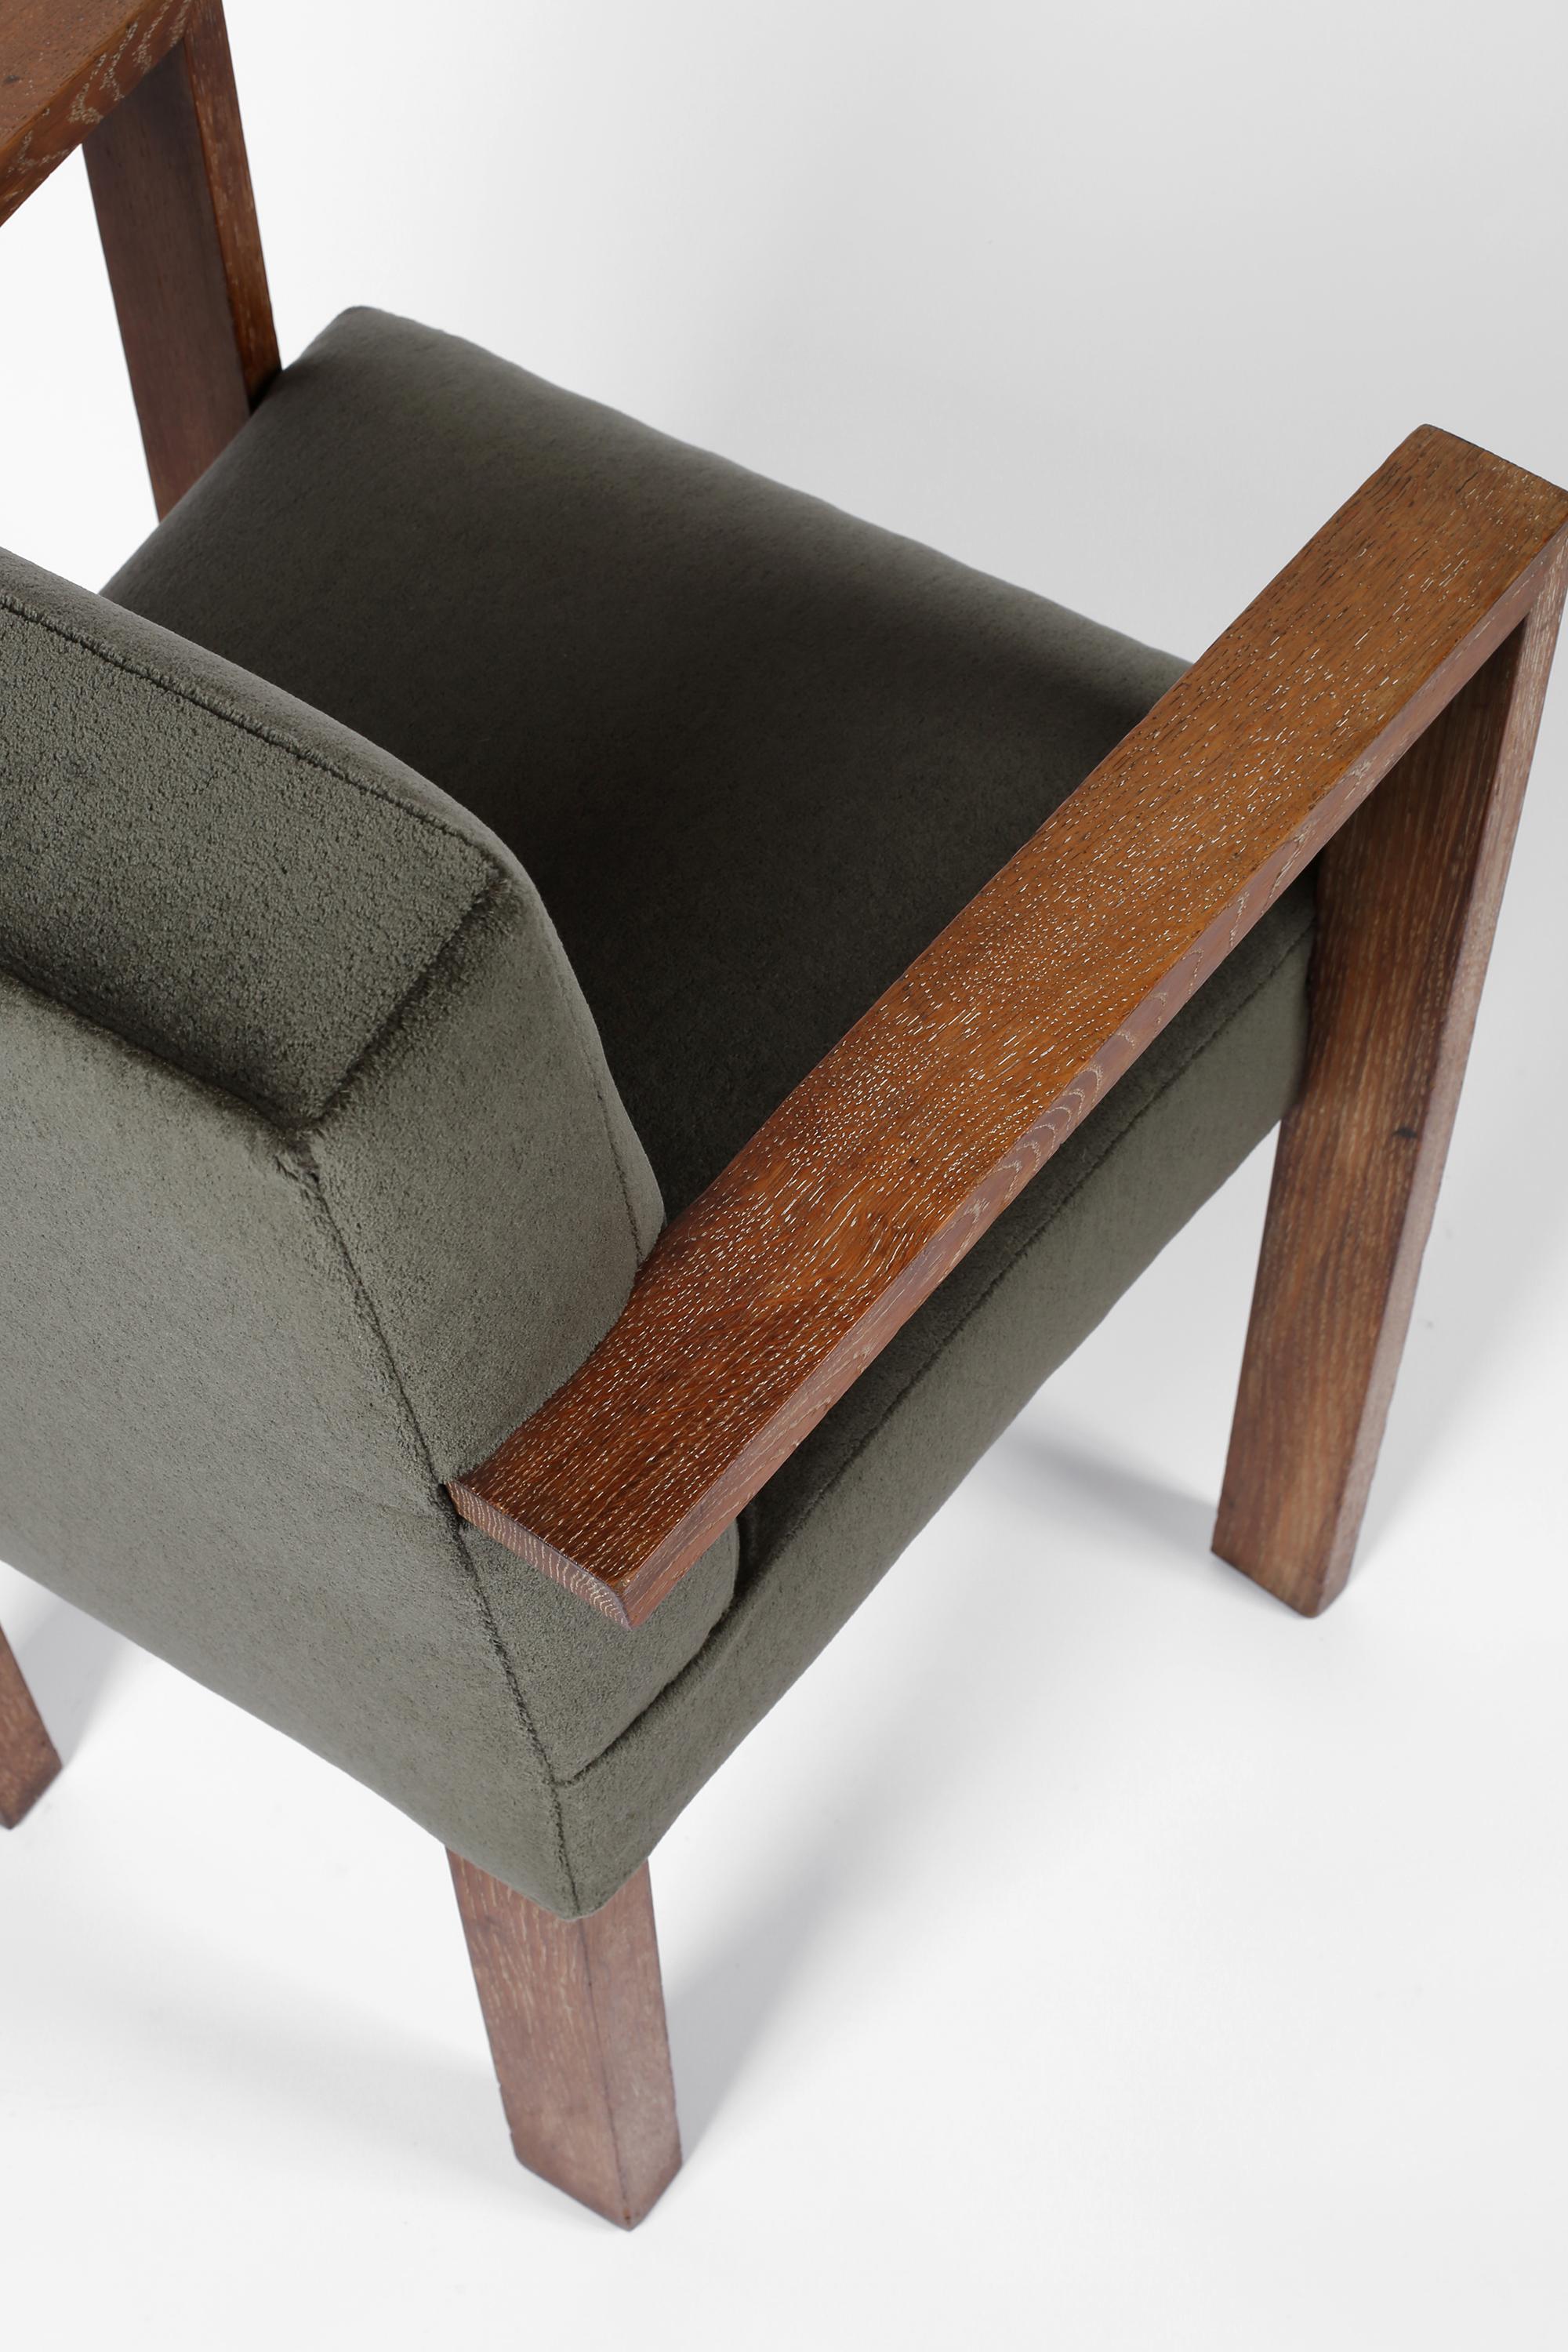 1940s French Modernist Armchair in Limed Oak and Mohair 6